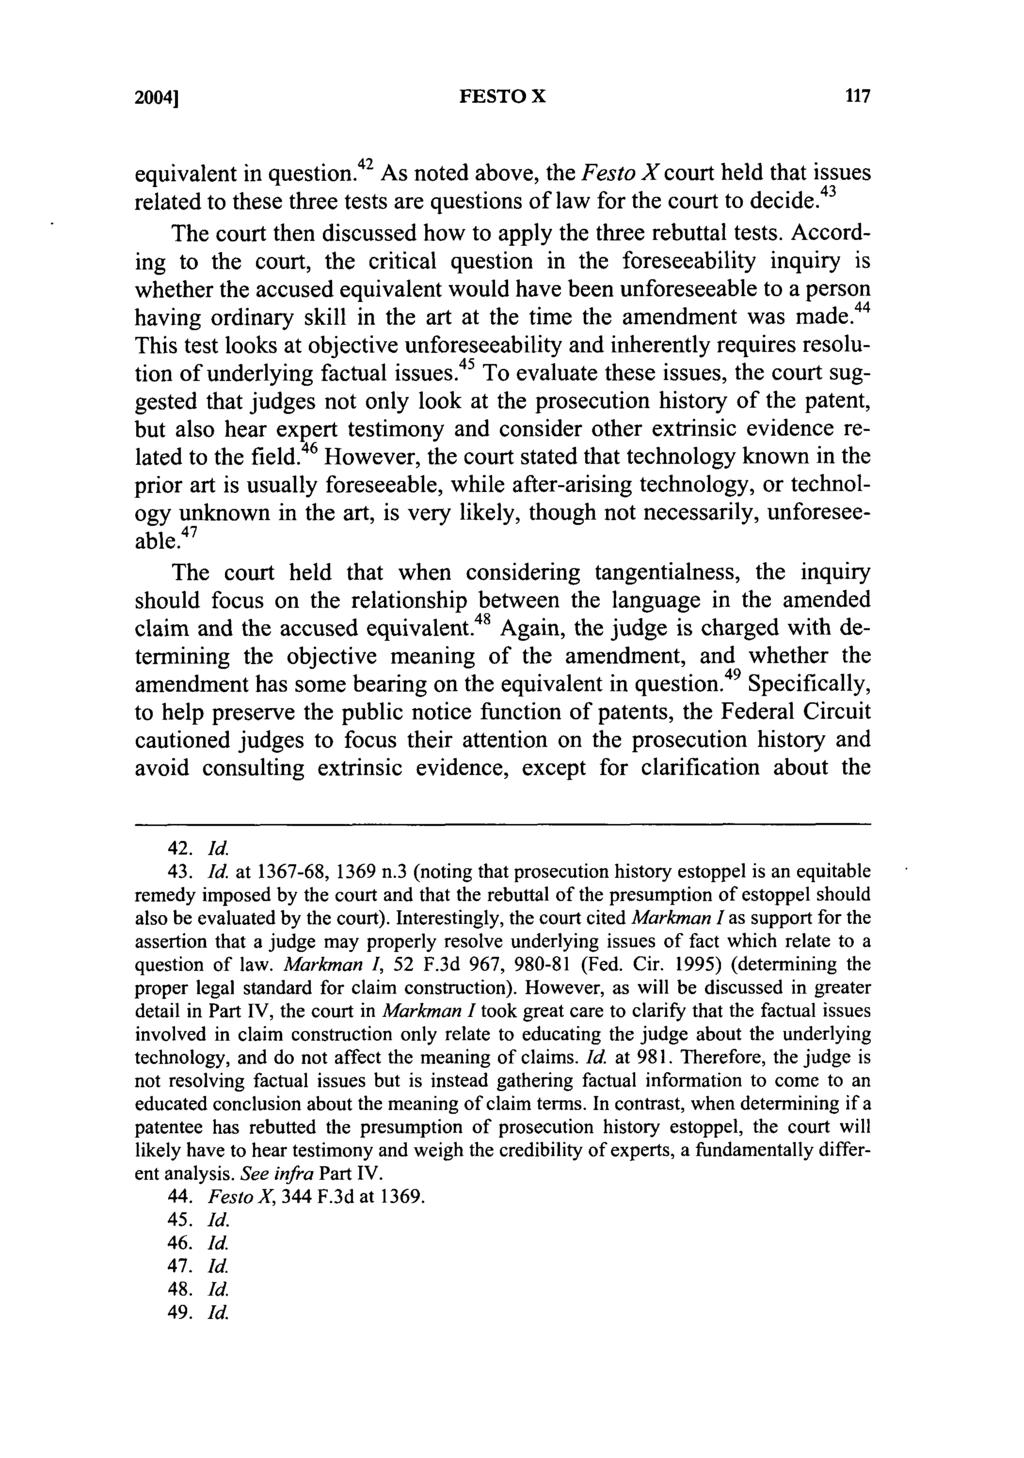 2004] FESTO X 42 equivalent in question. As noted above, the Festo X court held that issues related to these three tests are questions of law for the court to decide.